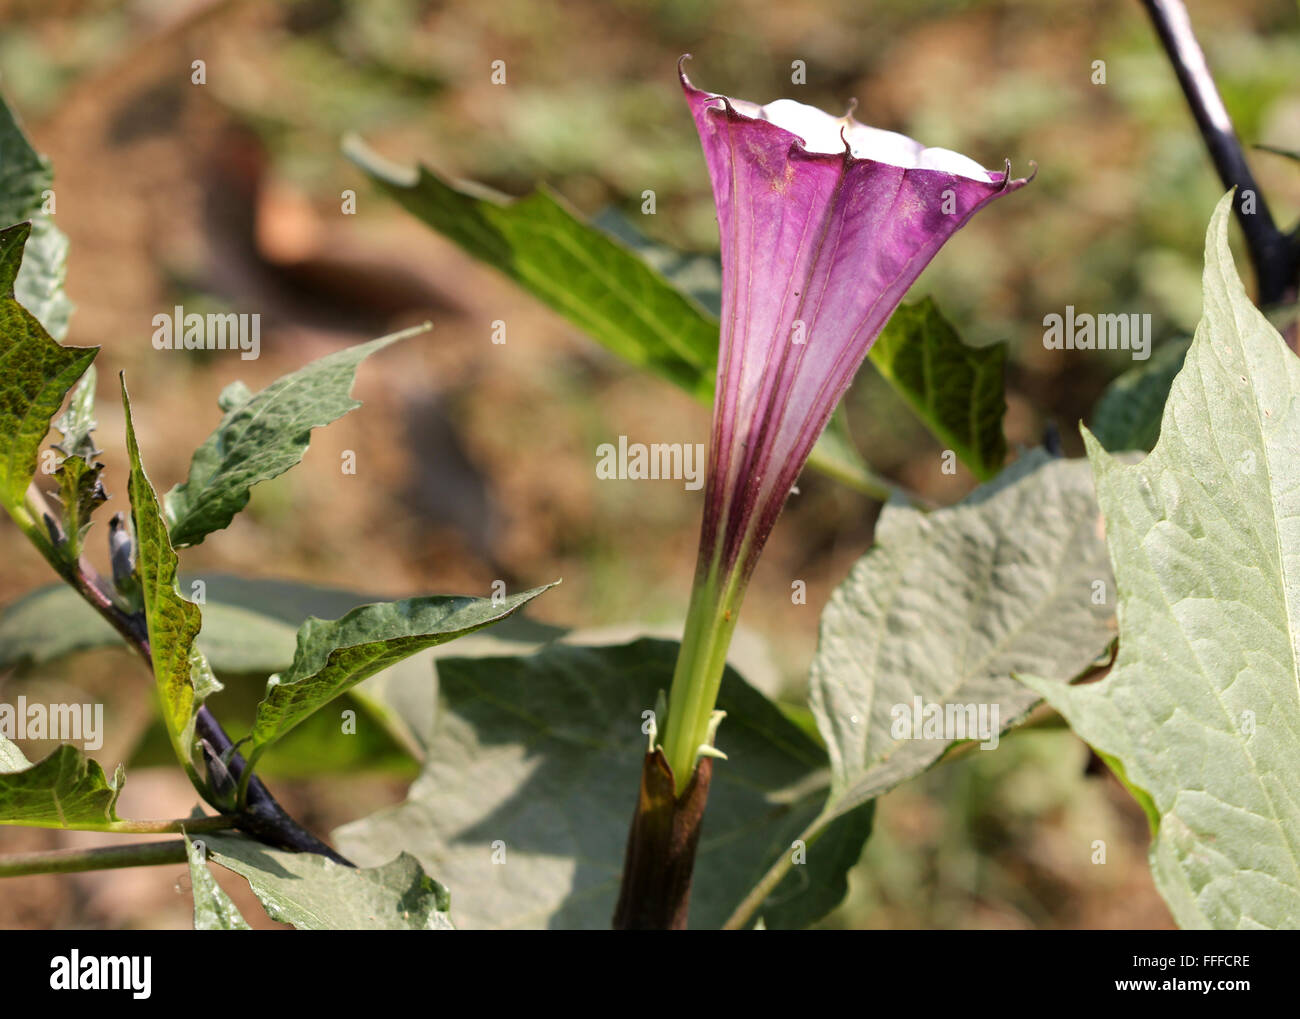 Datura metel, devil's trumpet, herb with usually red stem, broad oval leaves, funnel-like flowers, ornamental, medicinal Stock Photo